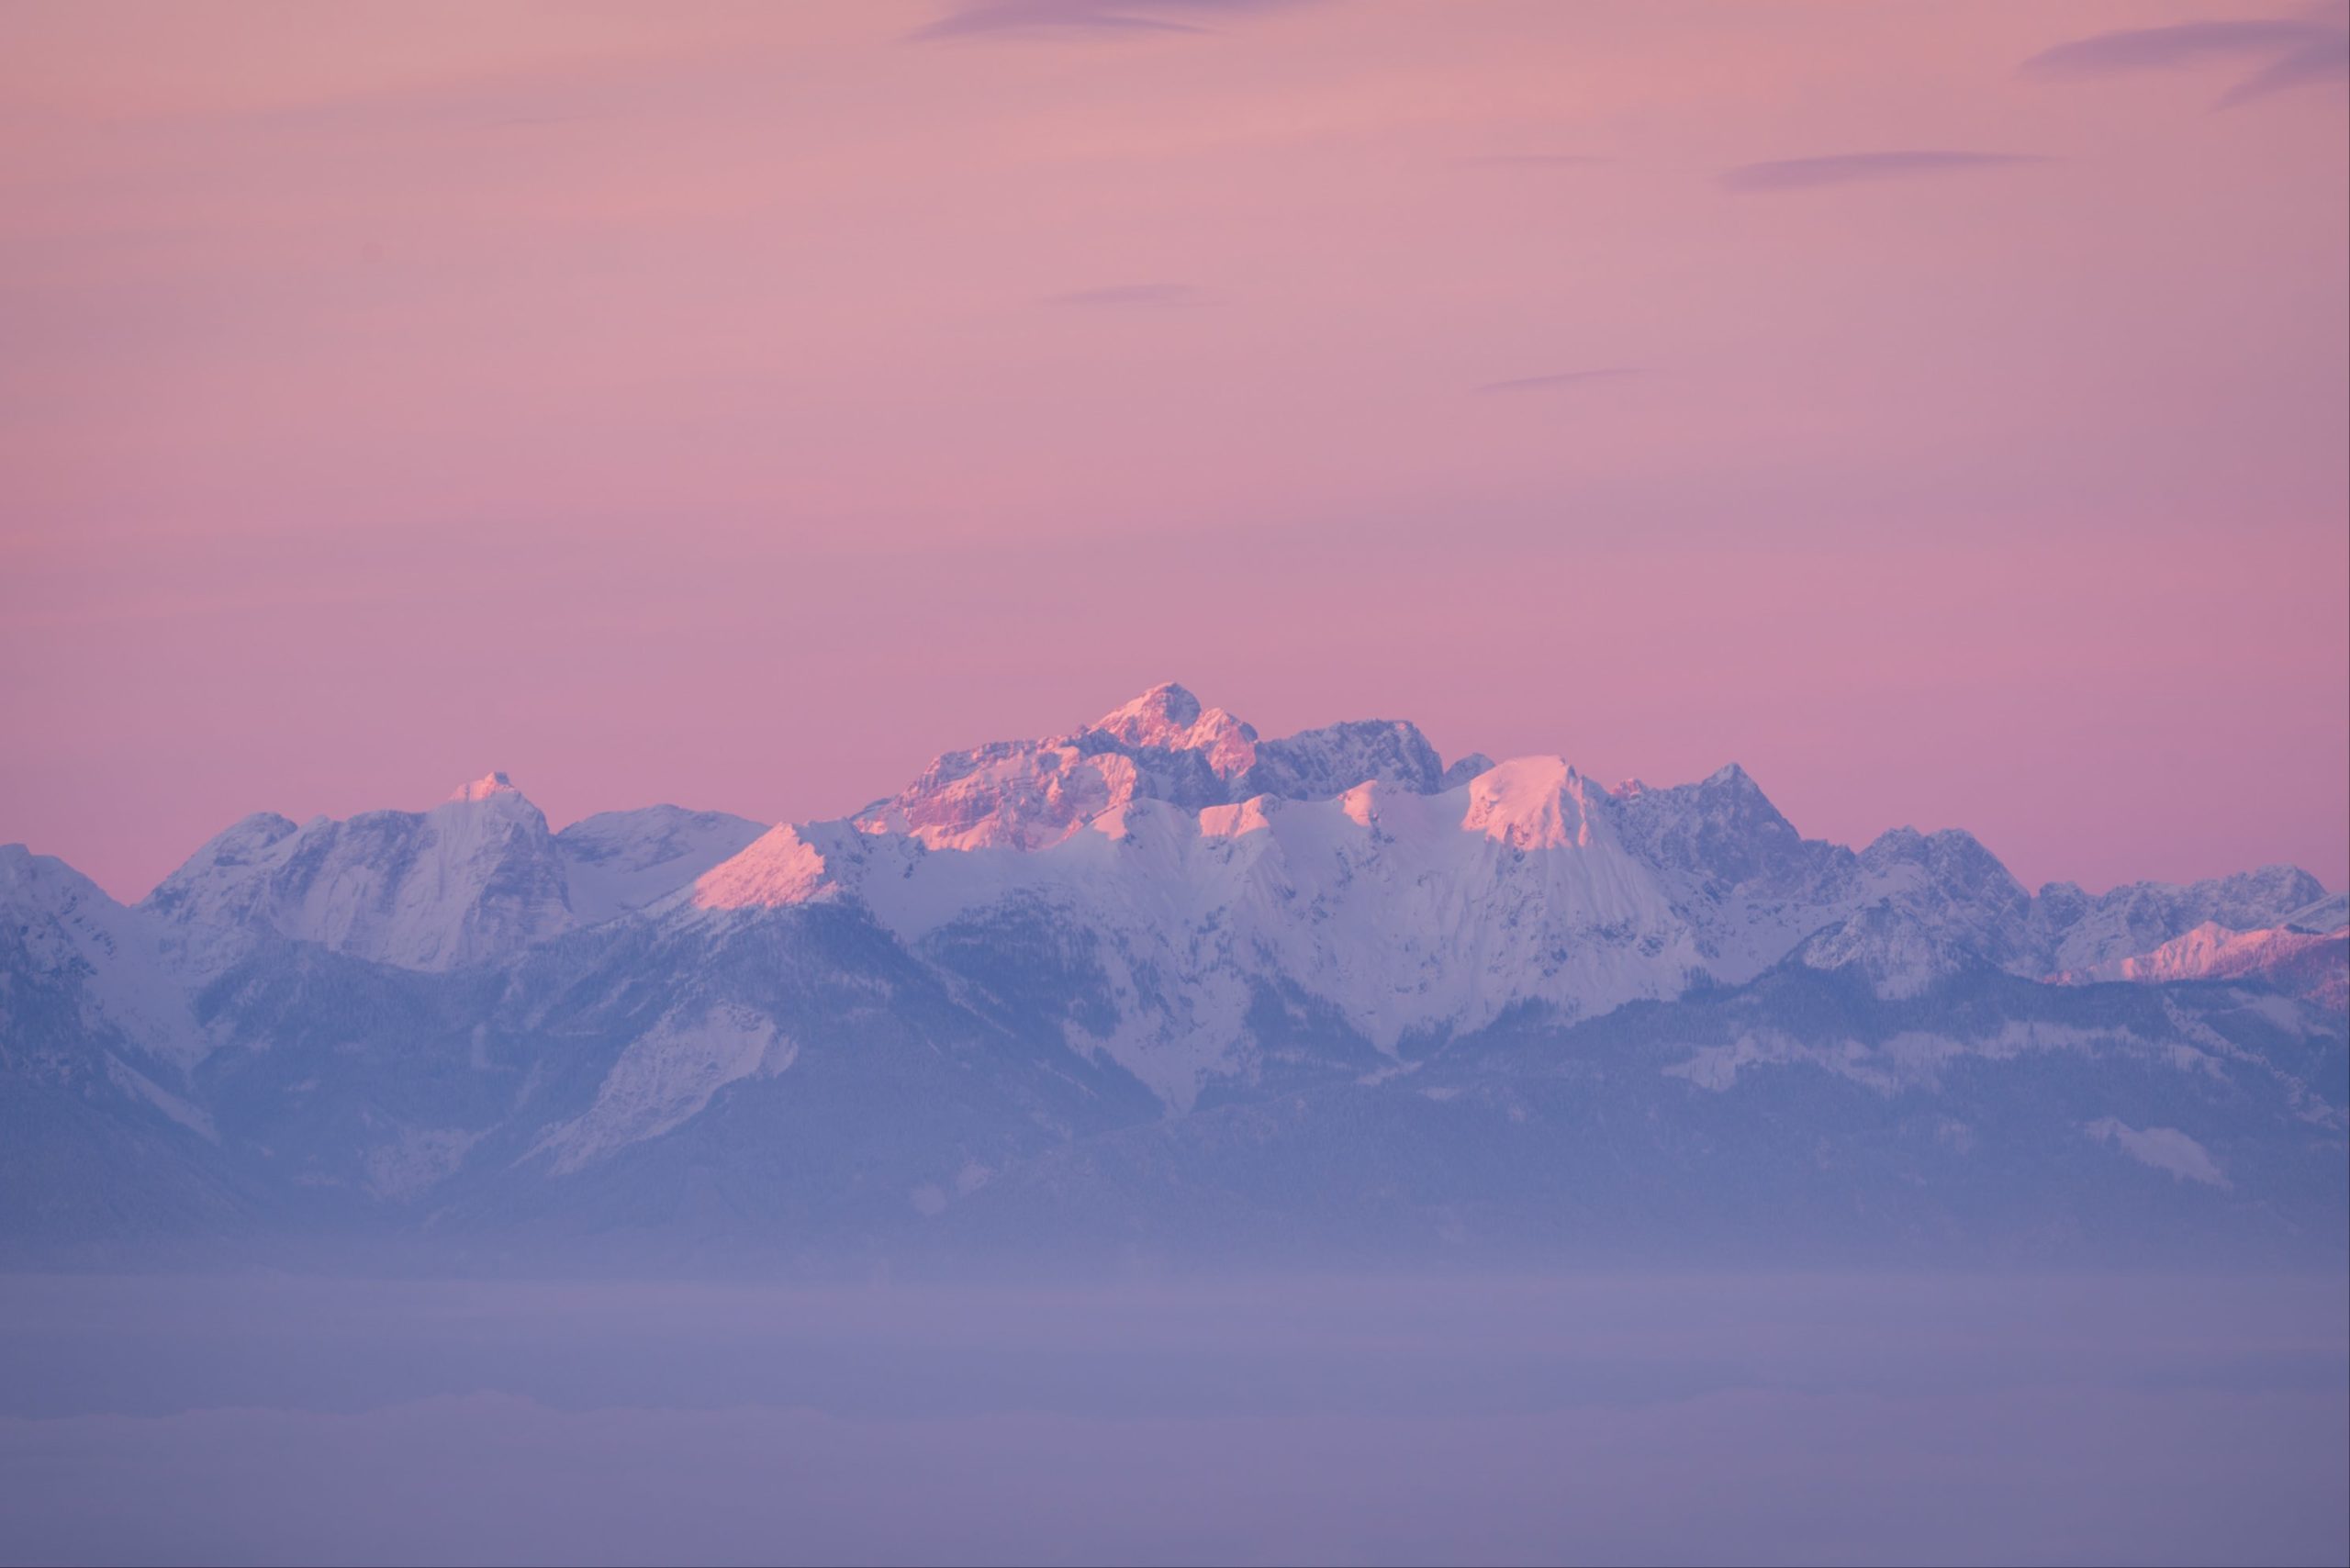 Dreamy pink winter sunrise over the Karawanken mountains and the Škrlatica massive in Slovenia from Magdalensberg